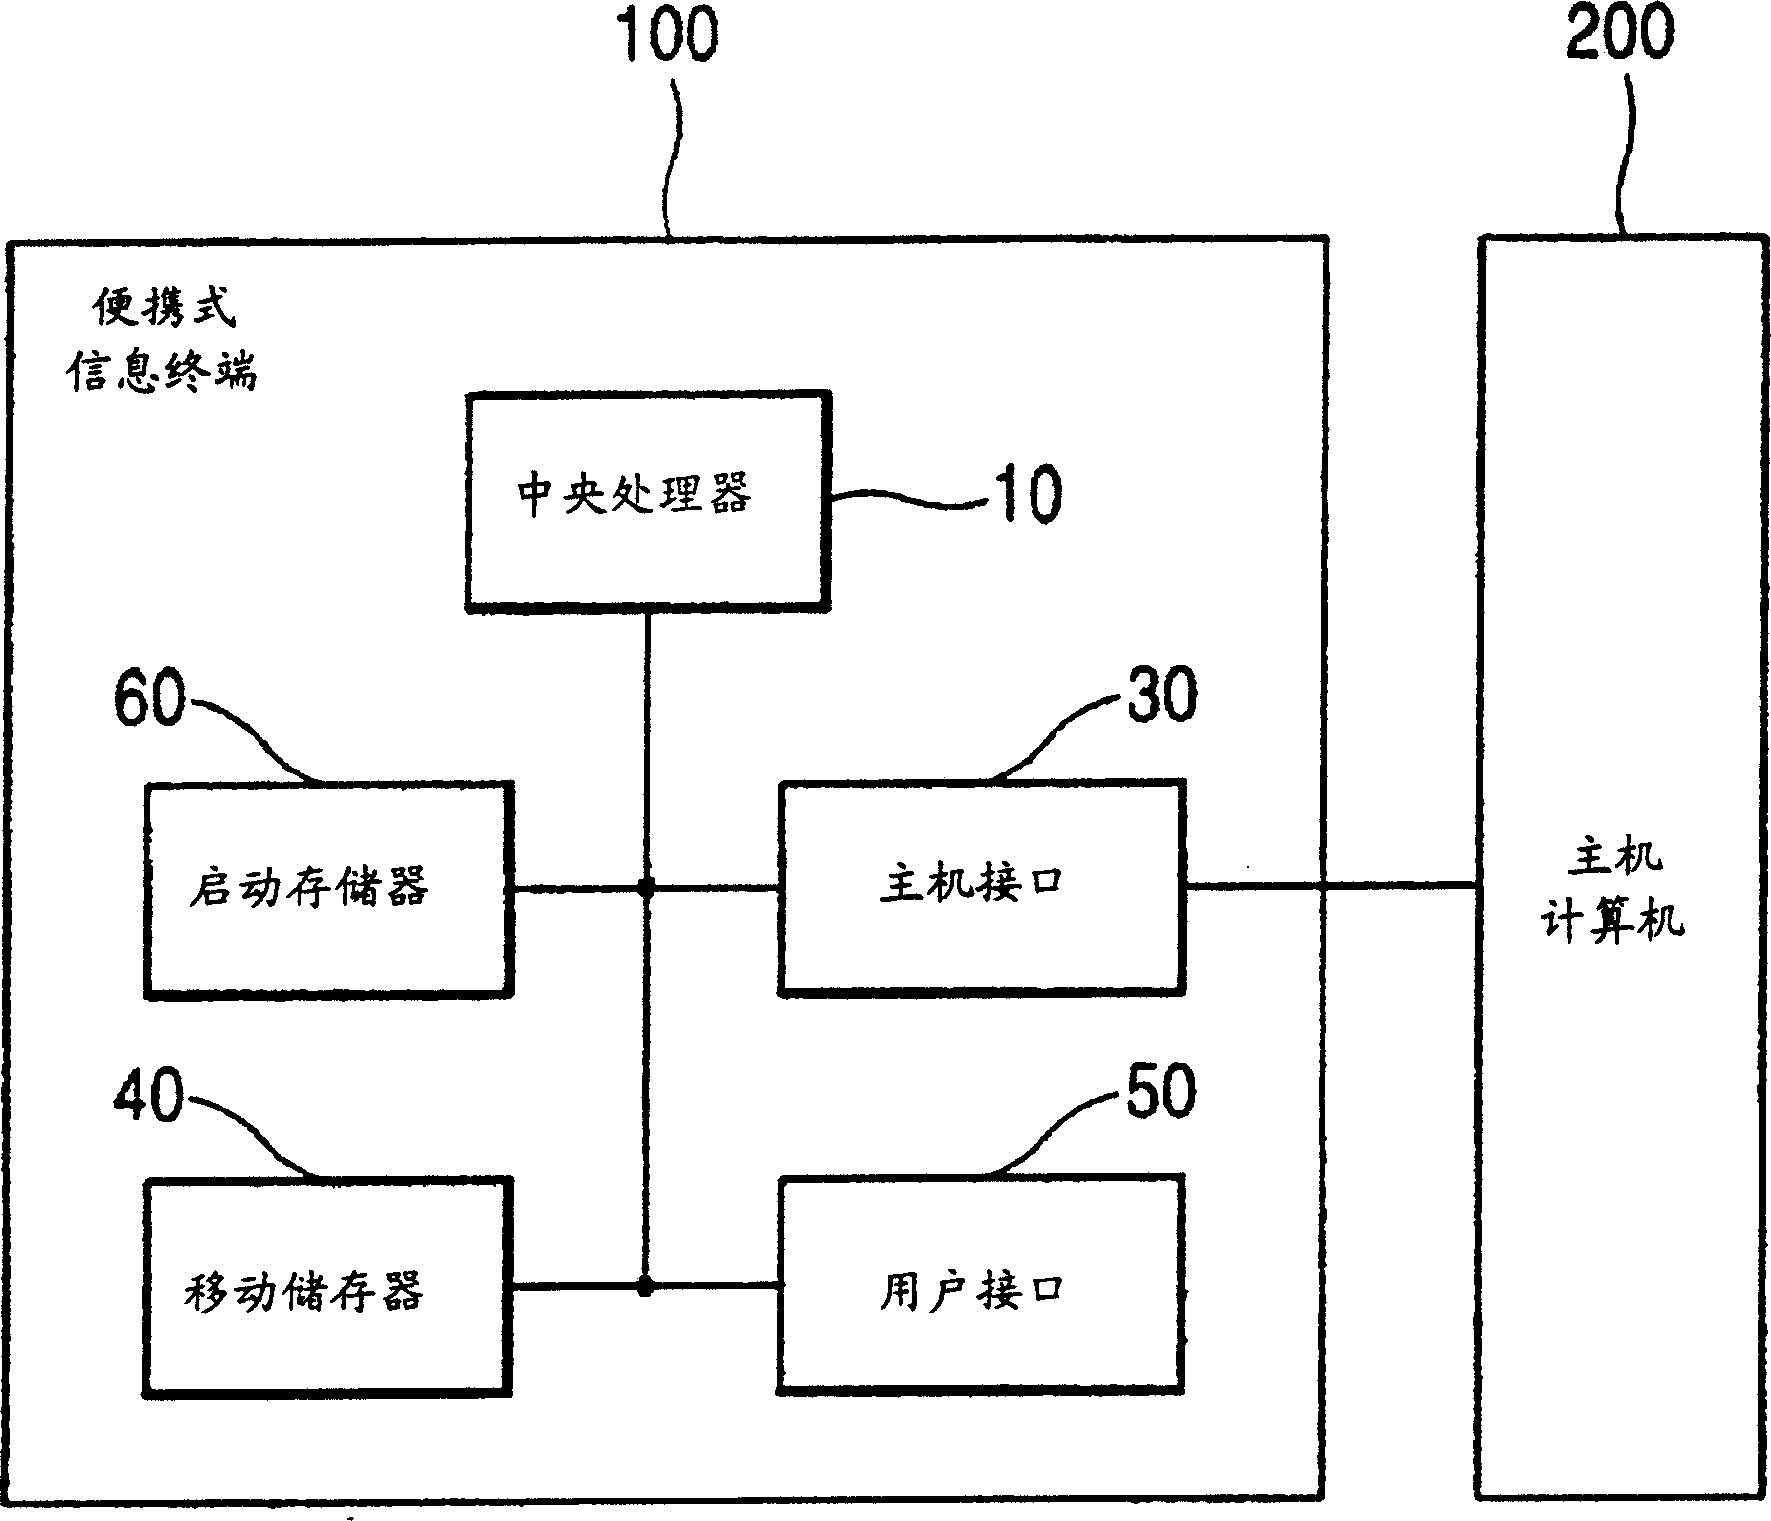 Portable information terminal and method for starting its operation system